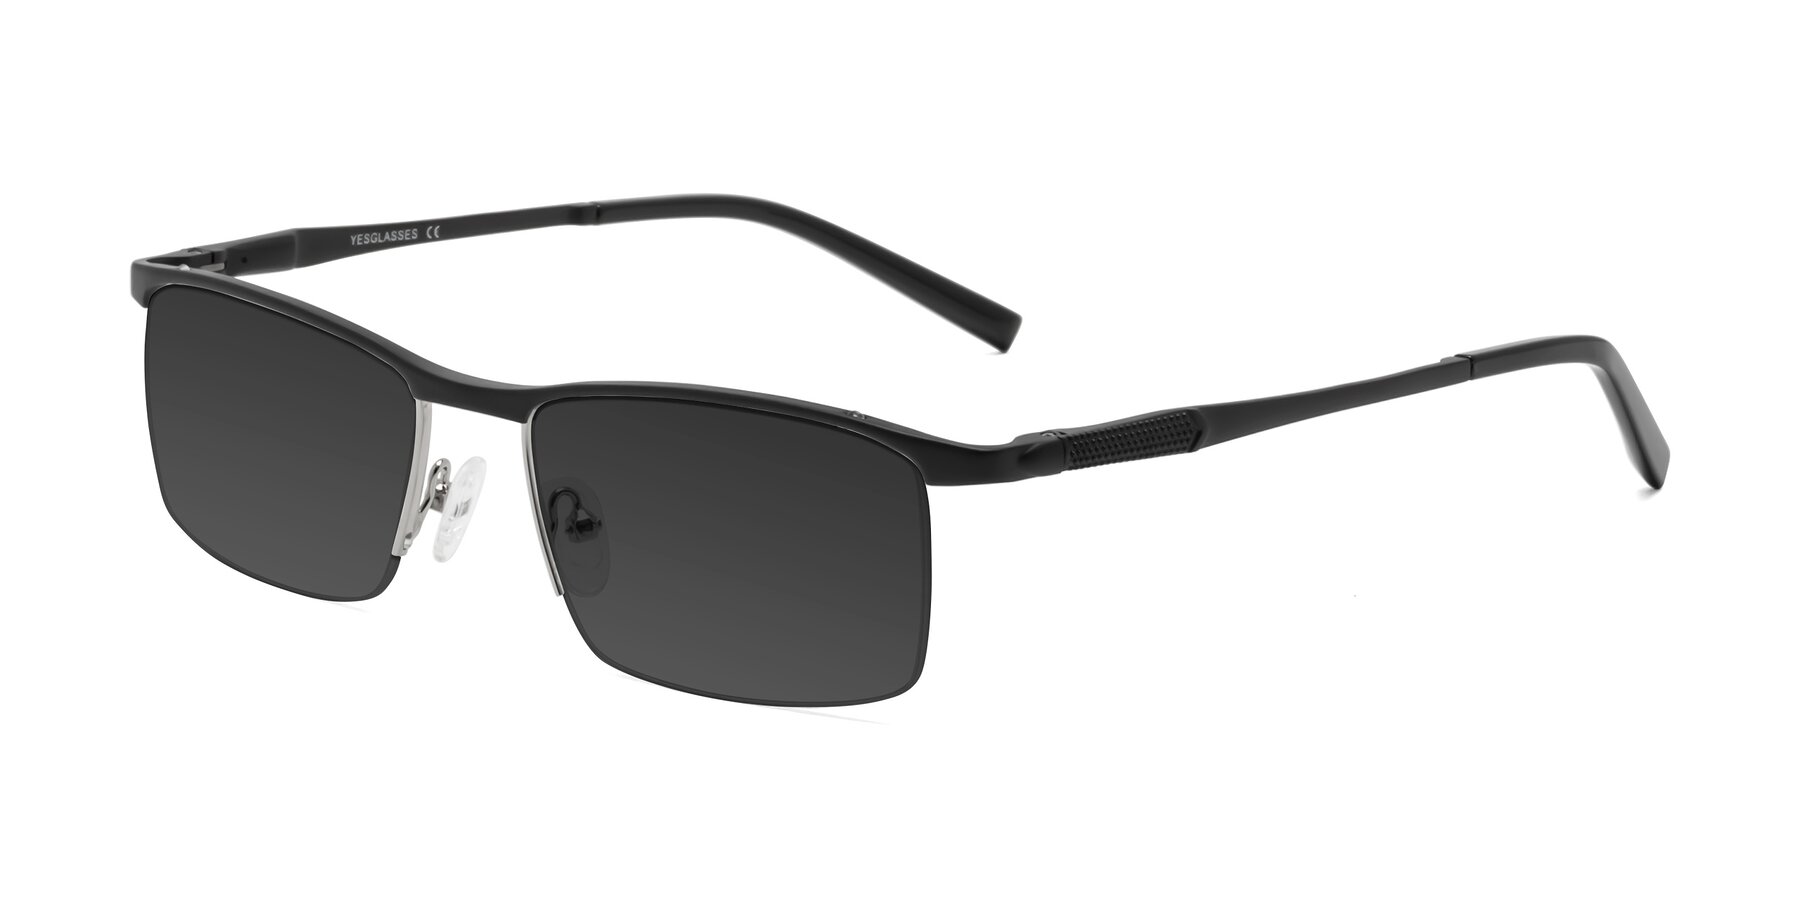 Angle of CX6303 in Black with Gray Tinted Lenses